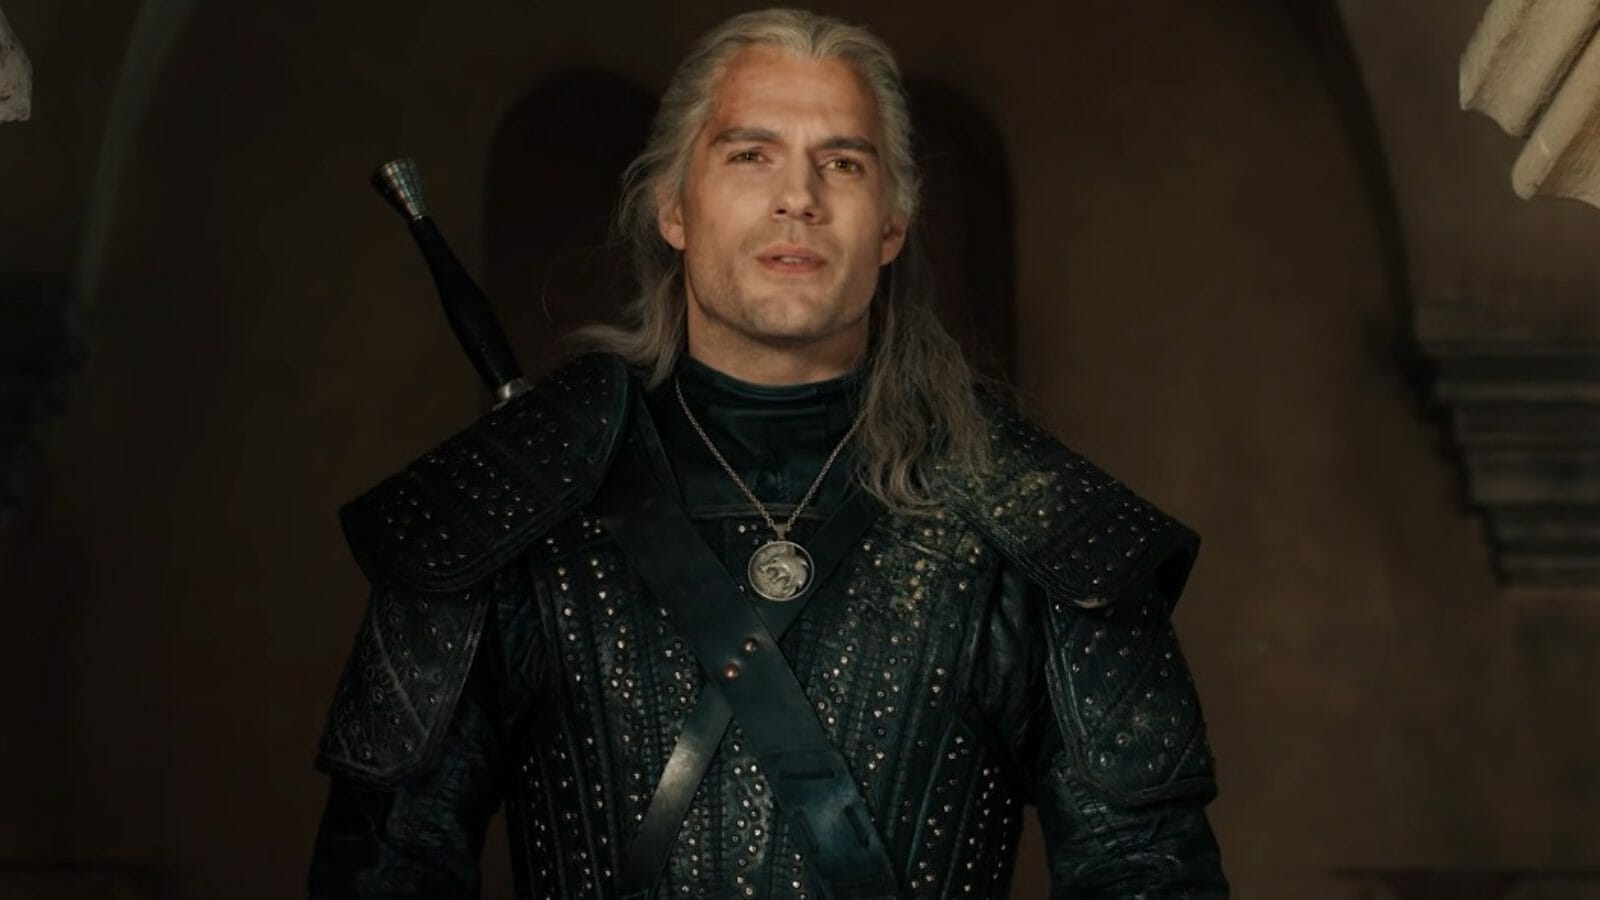 Henry Cavill as Geralt In The Witcher